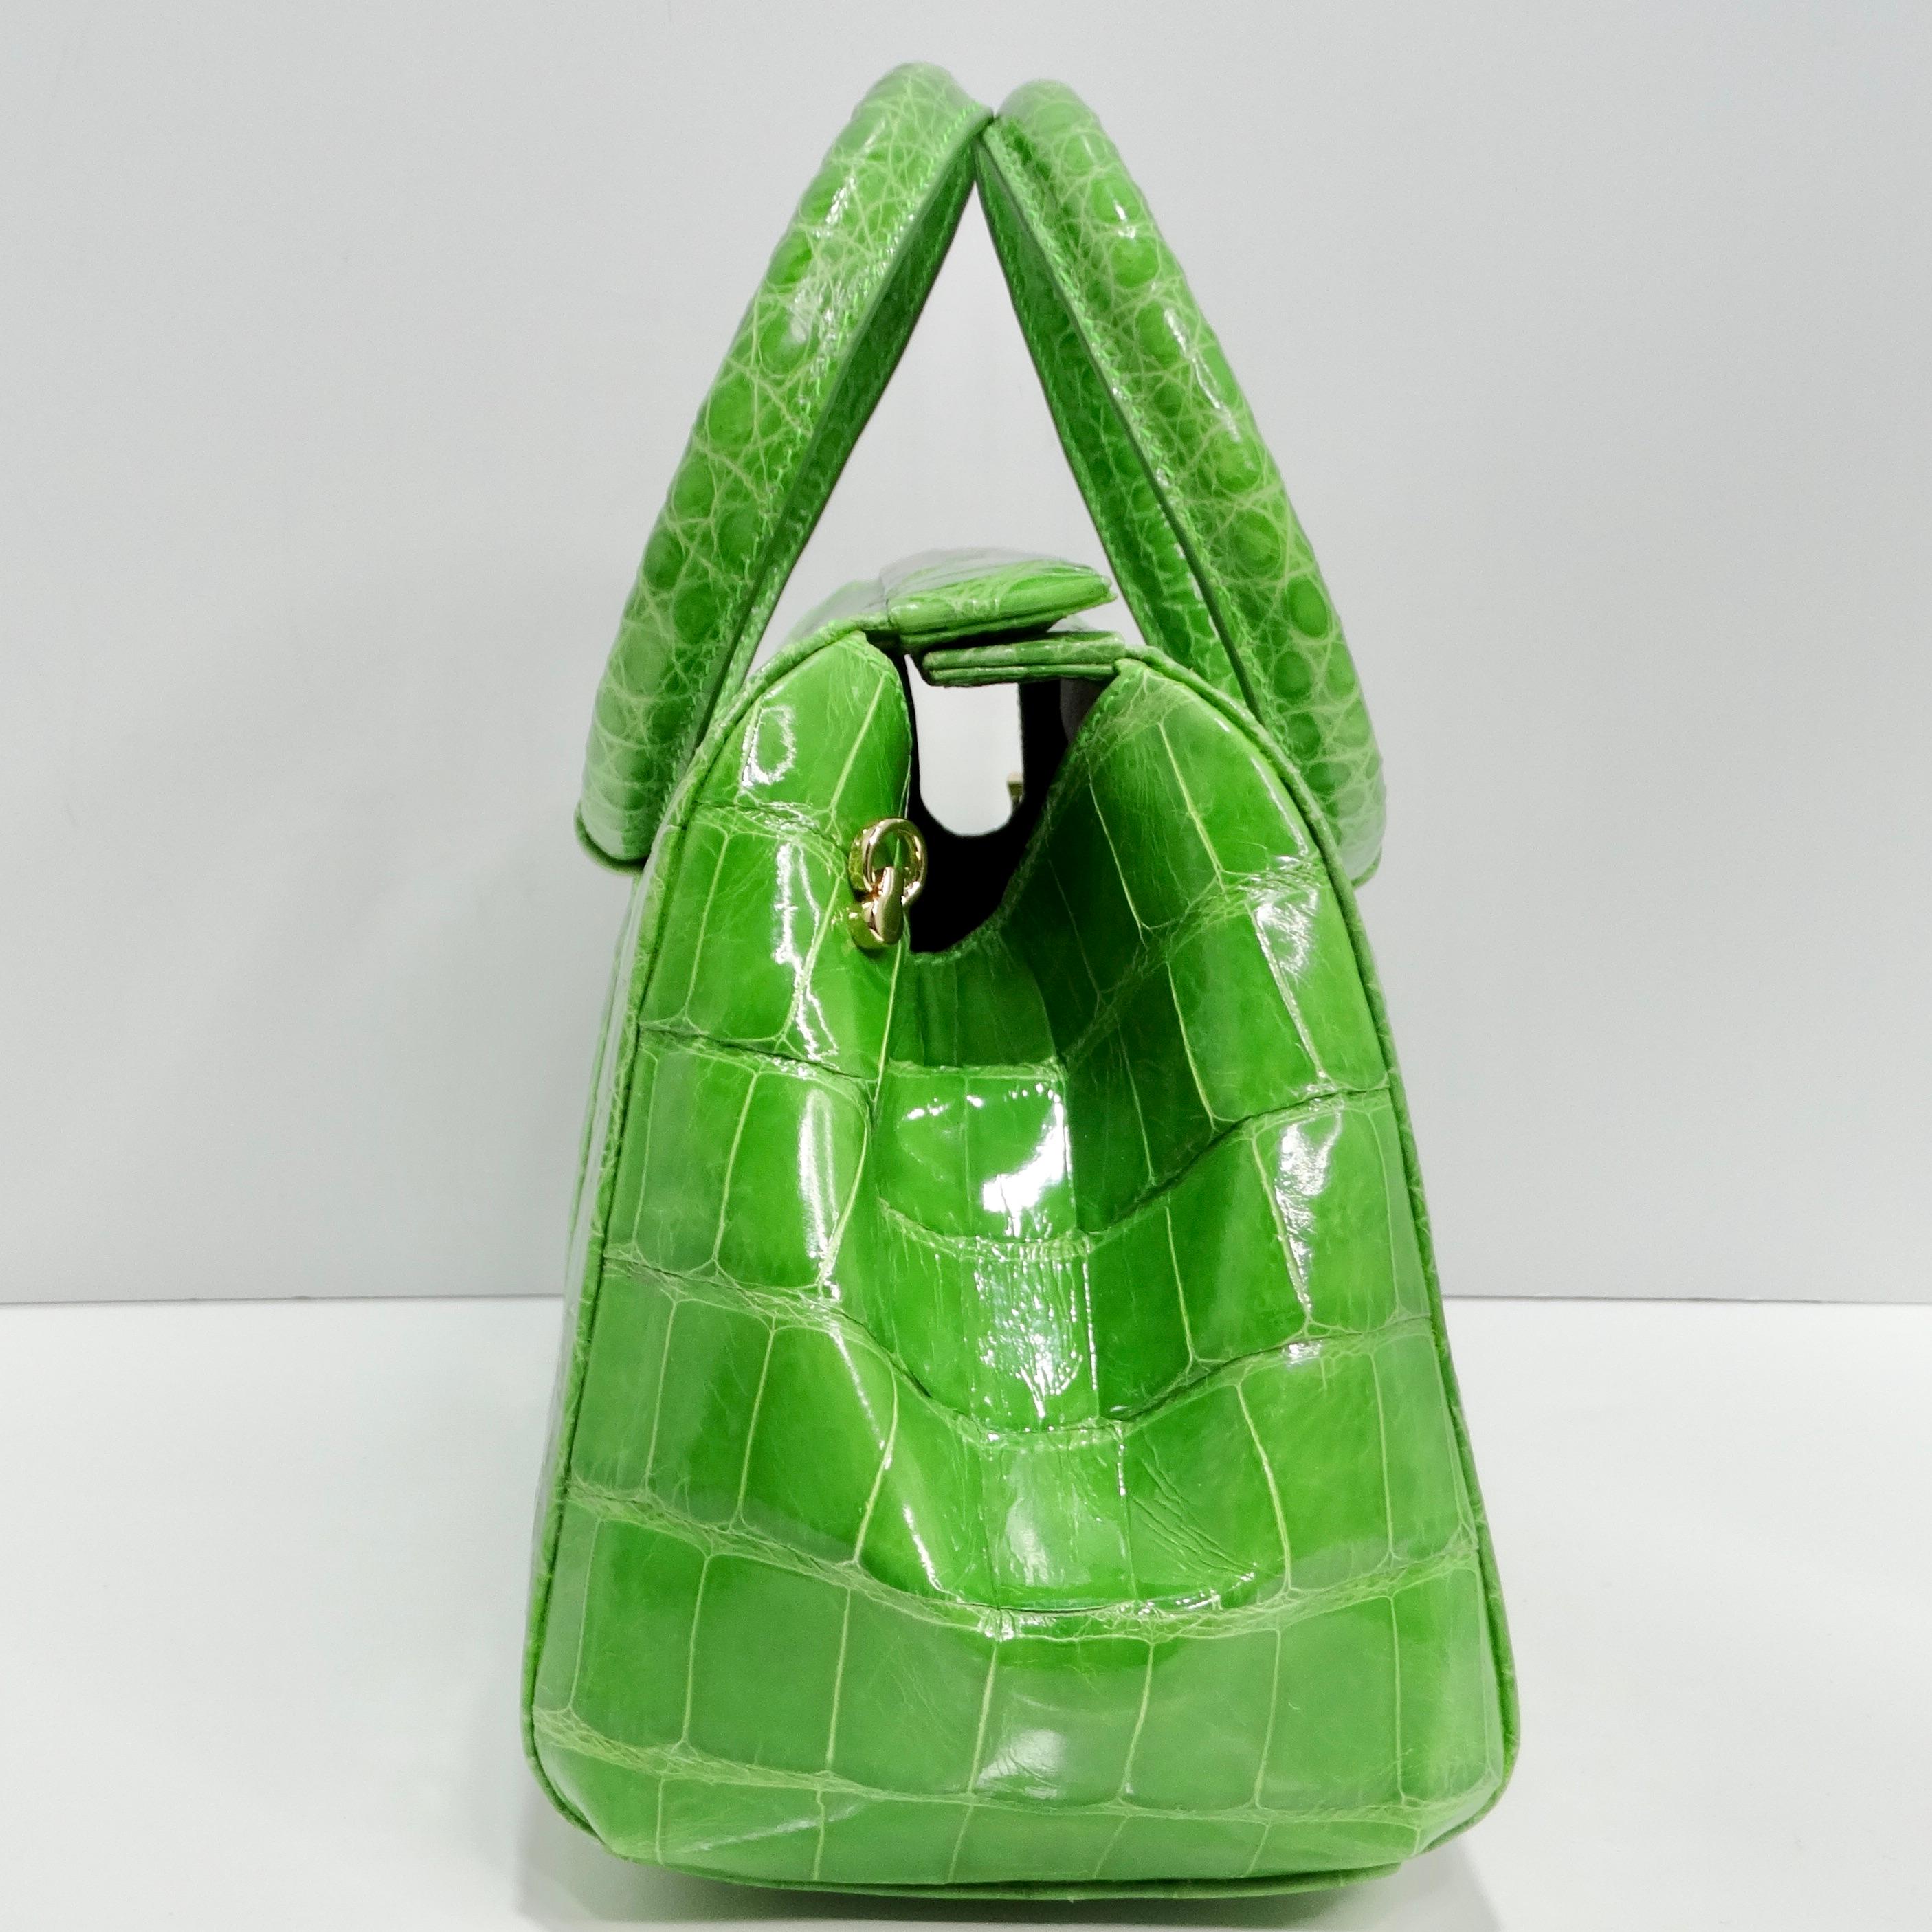 BC Luxury Green Crocodile Top Handle Bag In Excellent Condition For Sale In Scottsdale, AZ